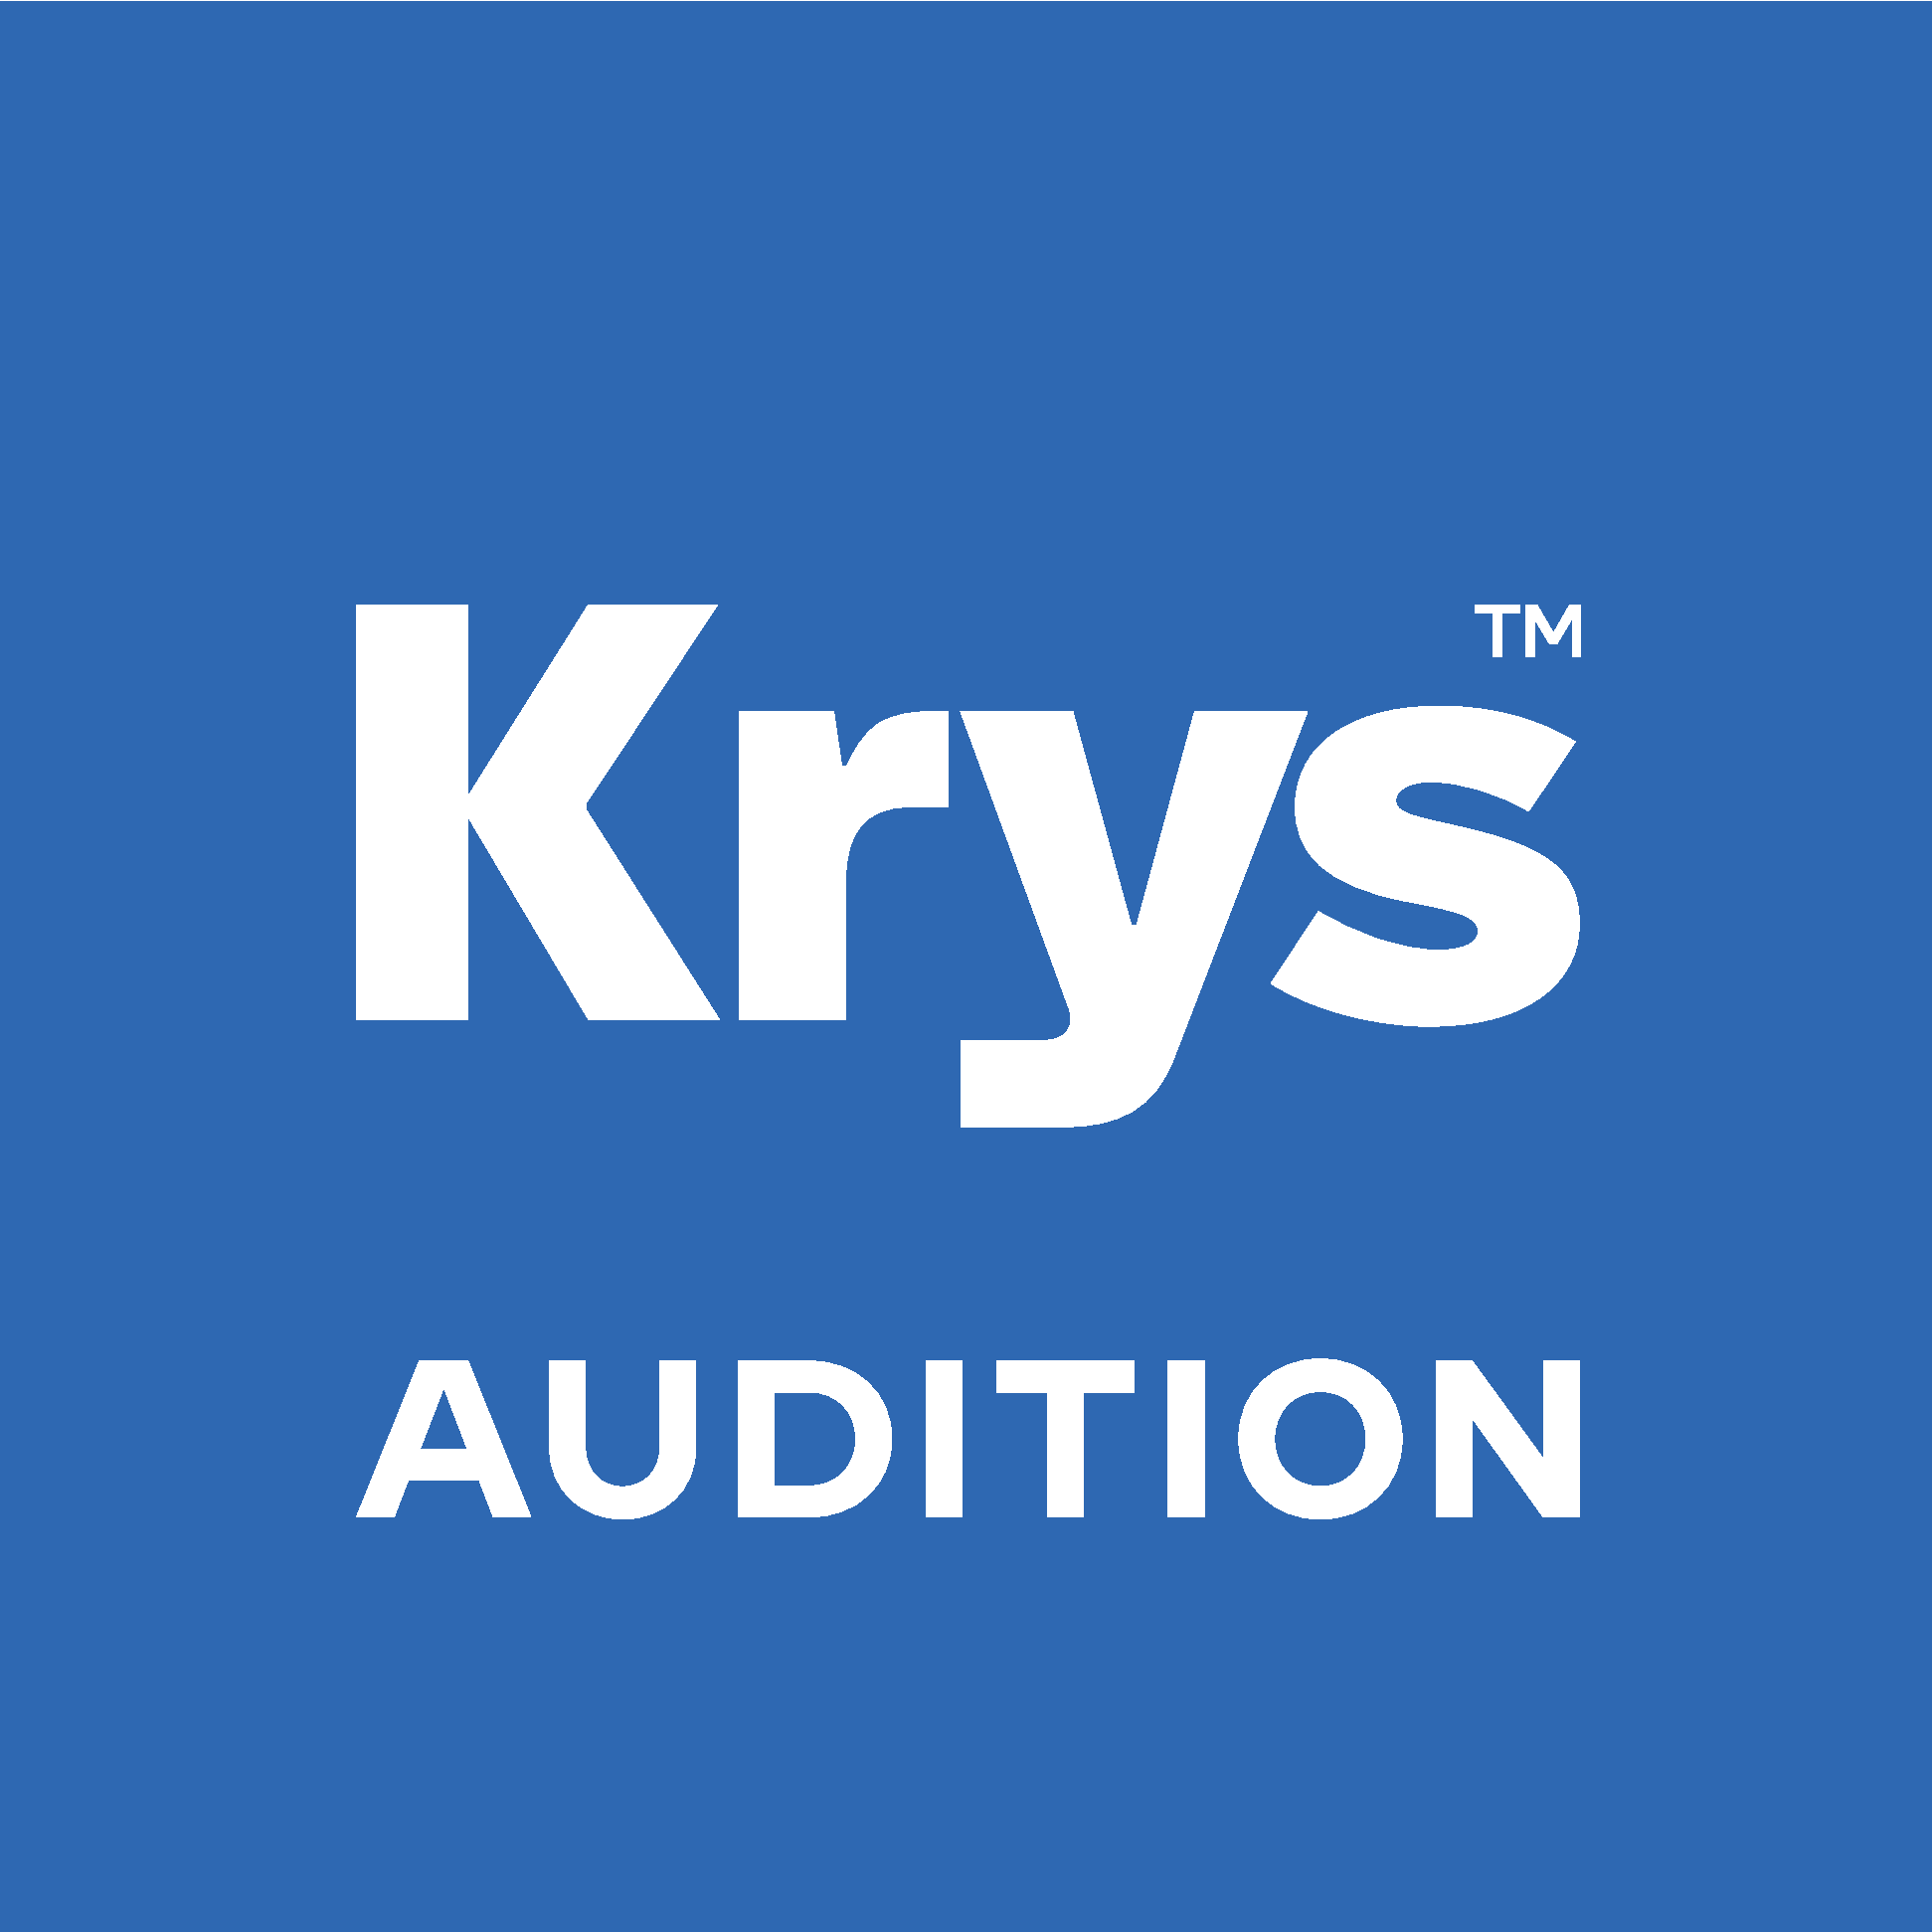 Audioprothésiste Krys Audition - Hearing Aid Store - Gaillac - 05 63 57 11 12 France | ShowMeLocal.com